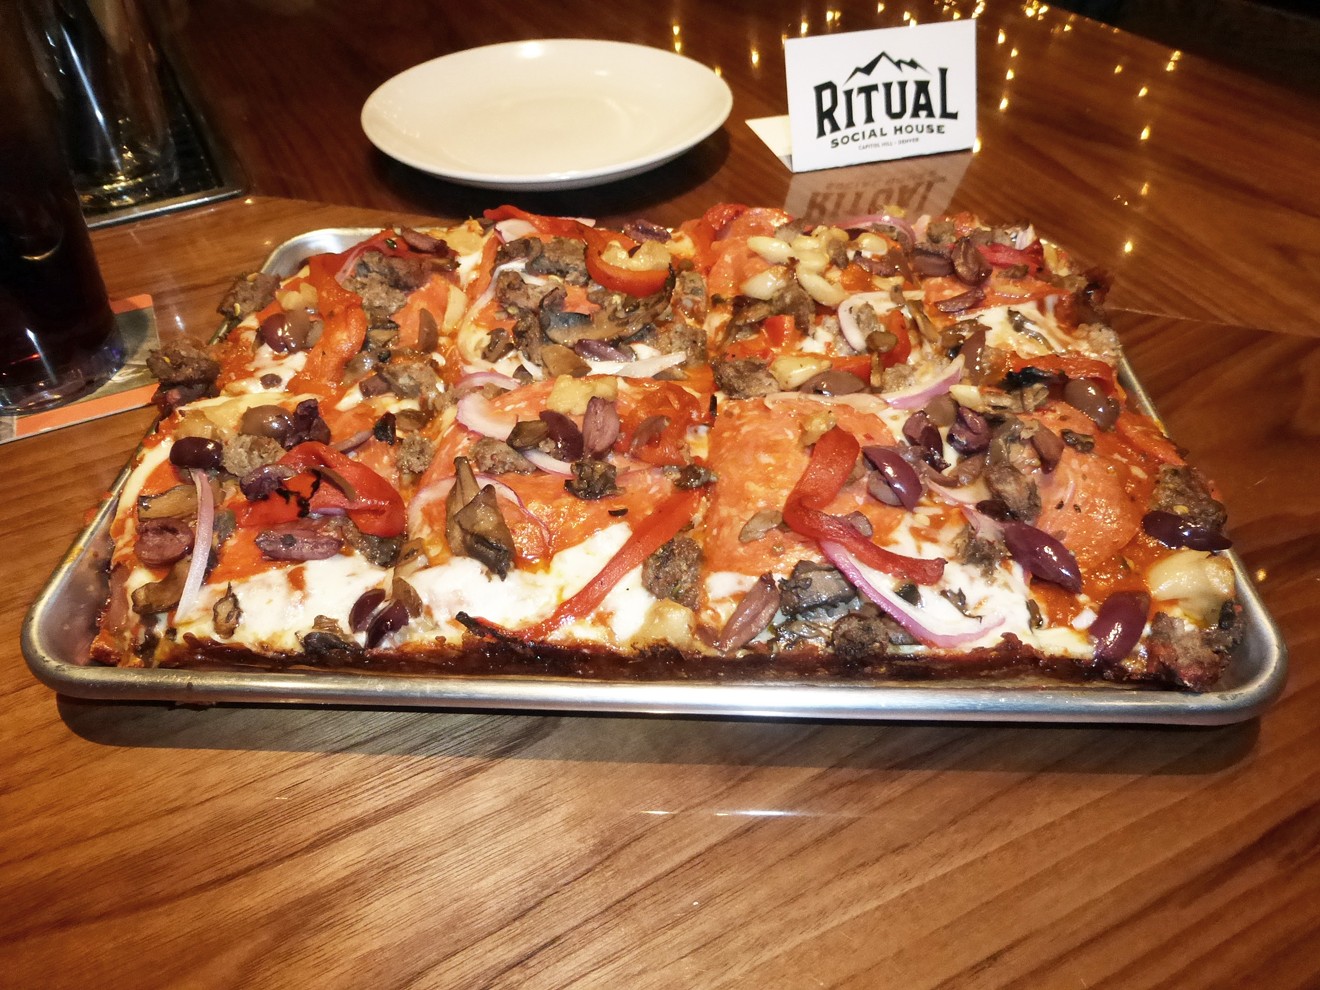 Ritual's pan pizza combines the best elements of Chicago, Detroit and Sicilian crusts.